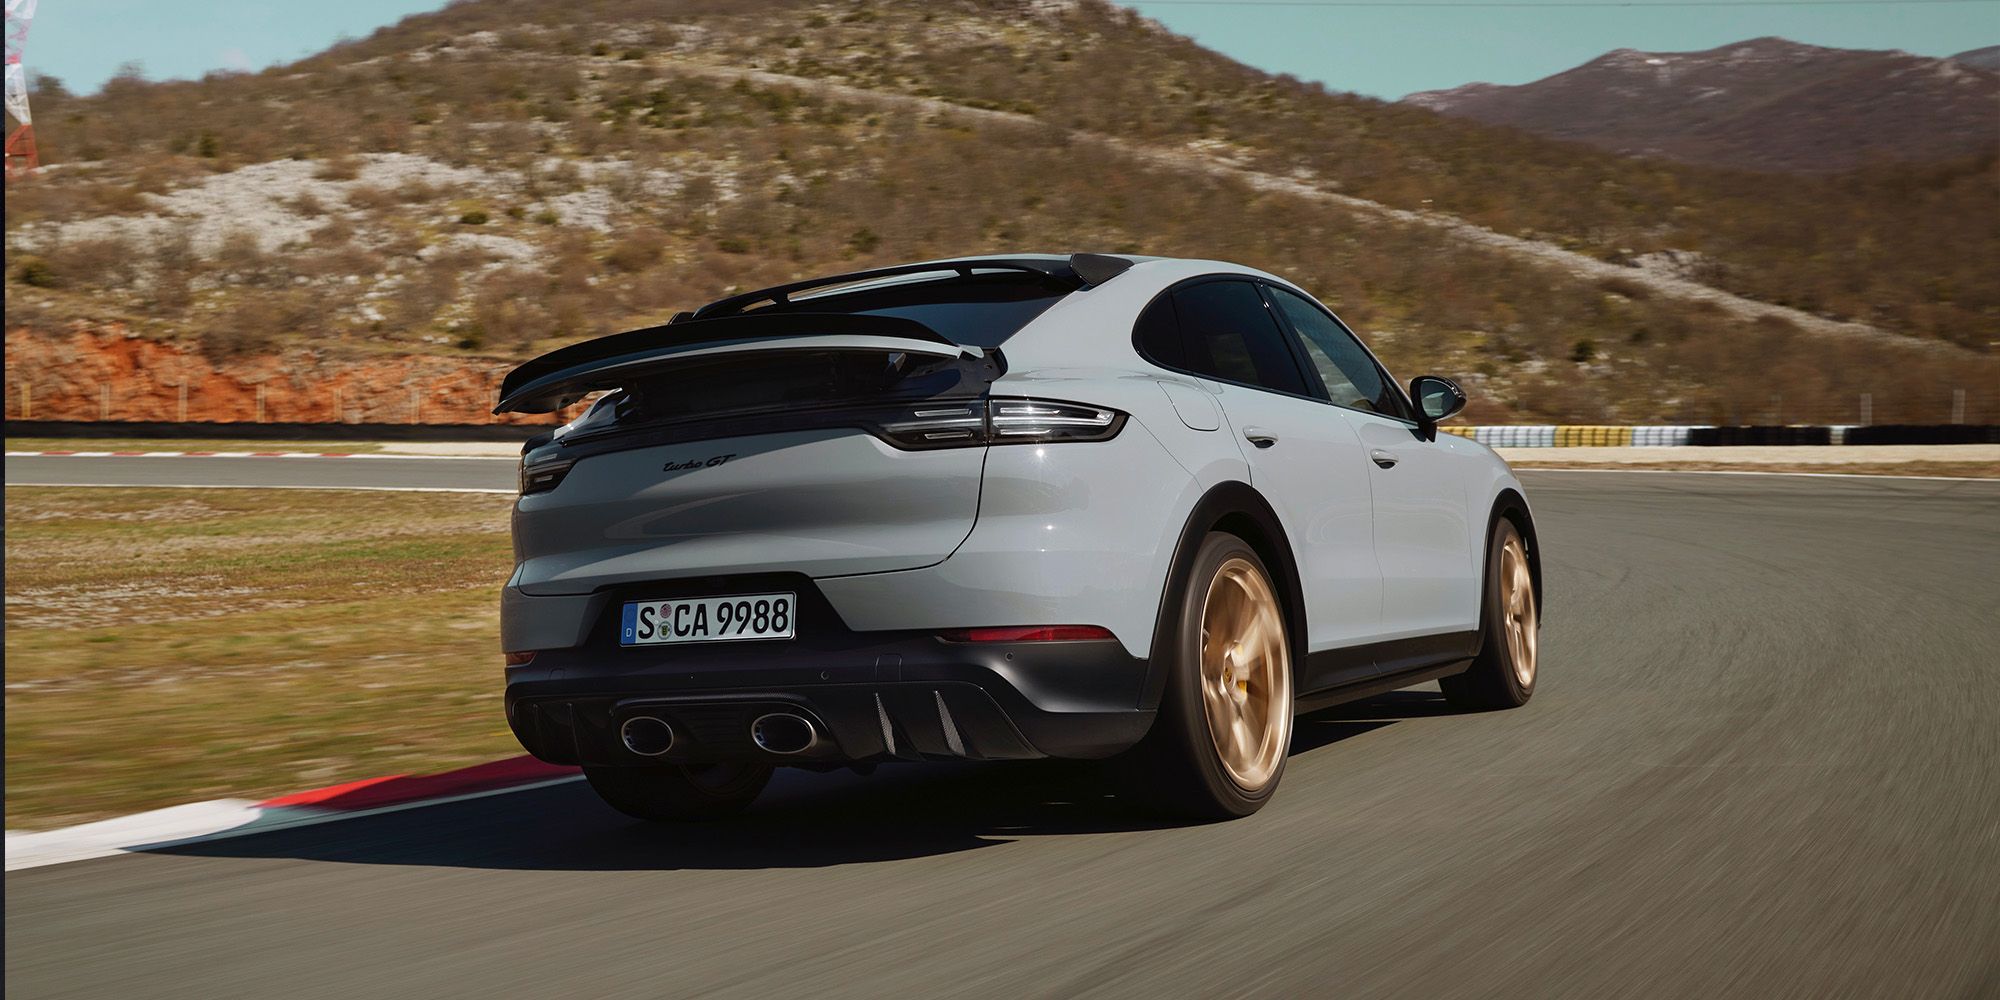 The rear of the Cayenne Turbo GT on track